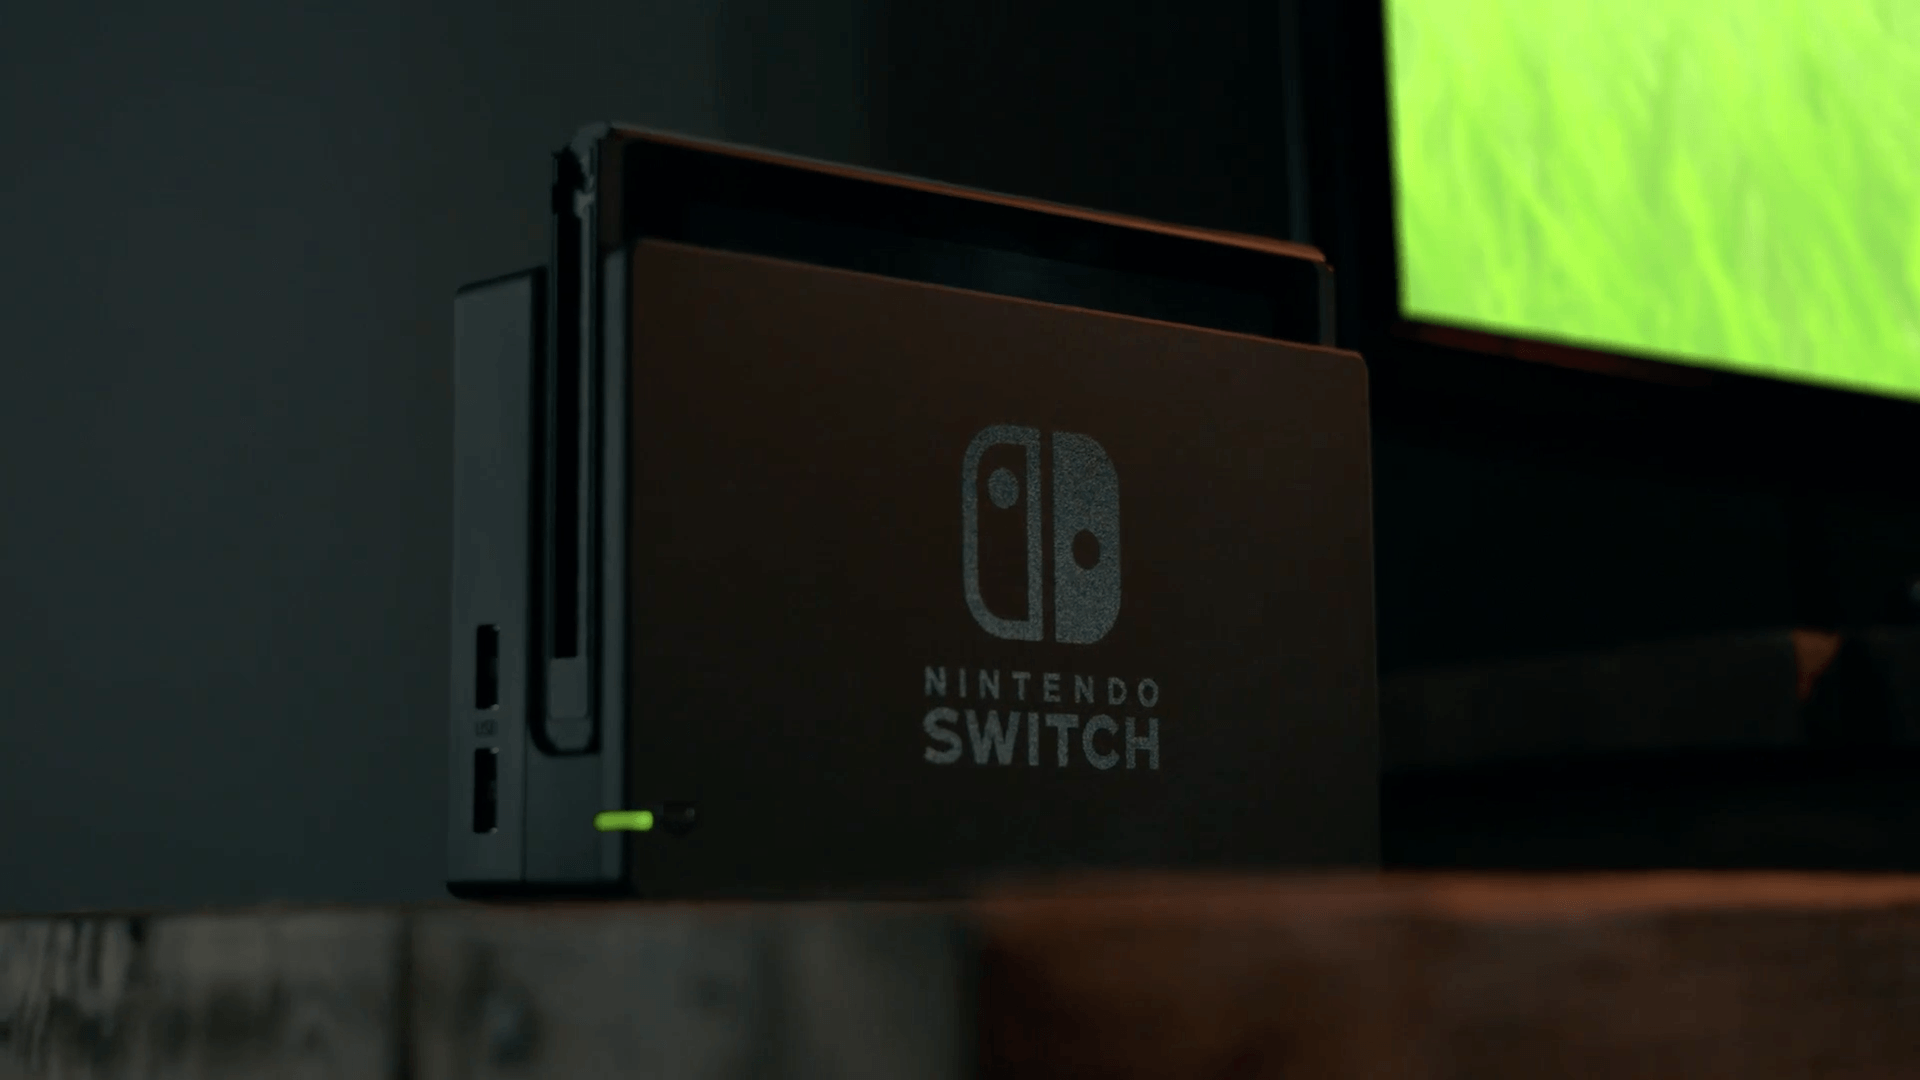 Nintendo Switch Wallpaper Image Photo Picture Background